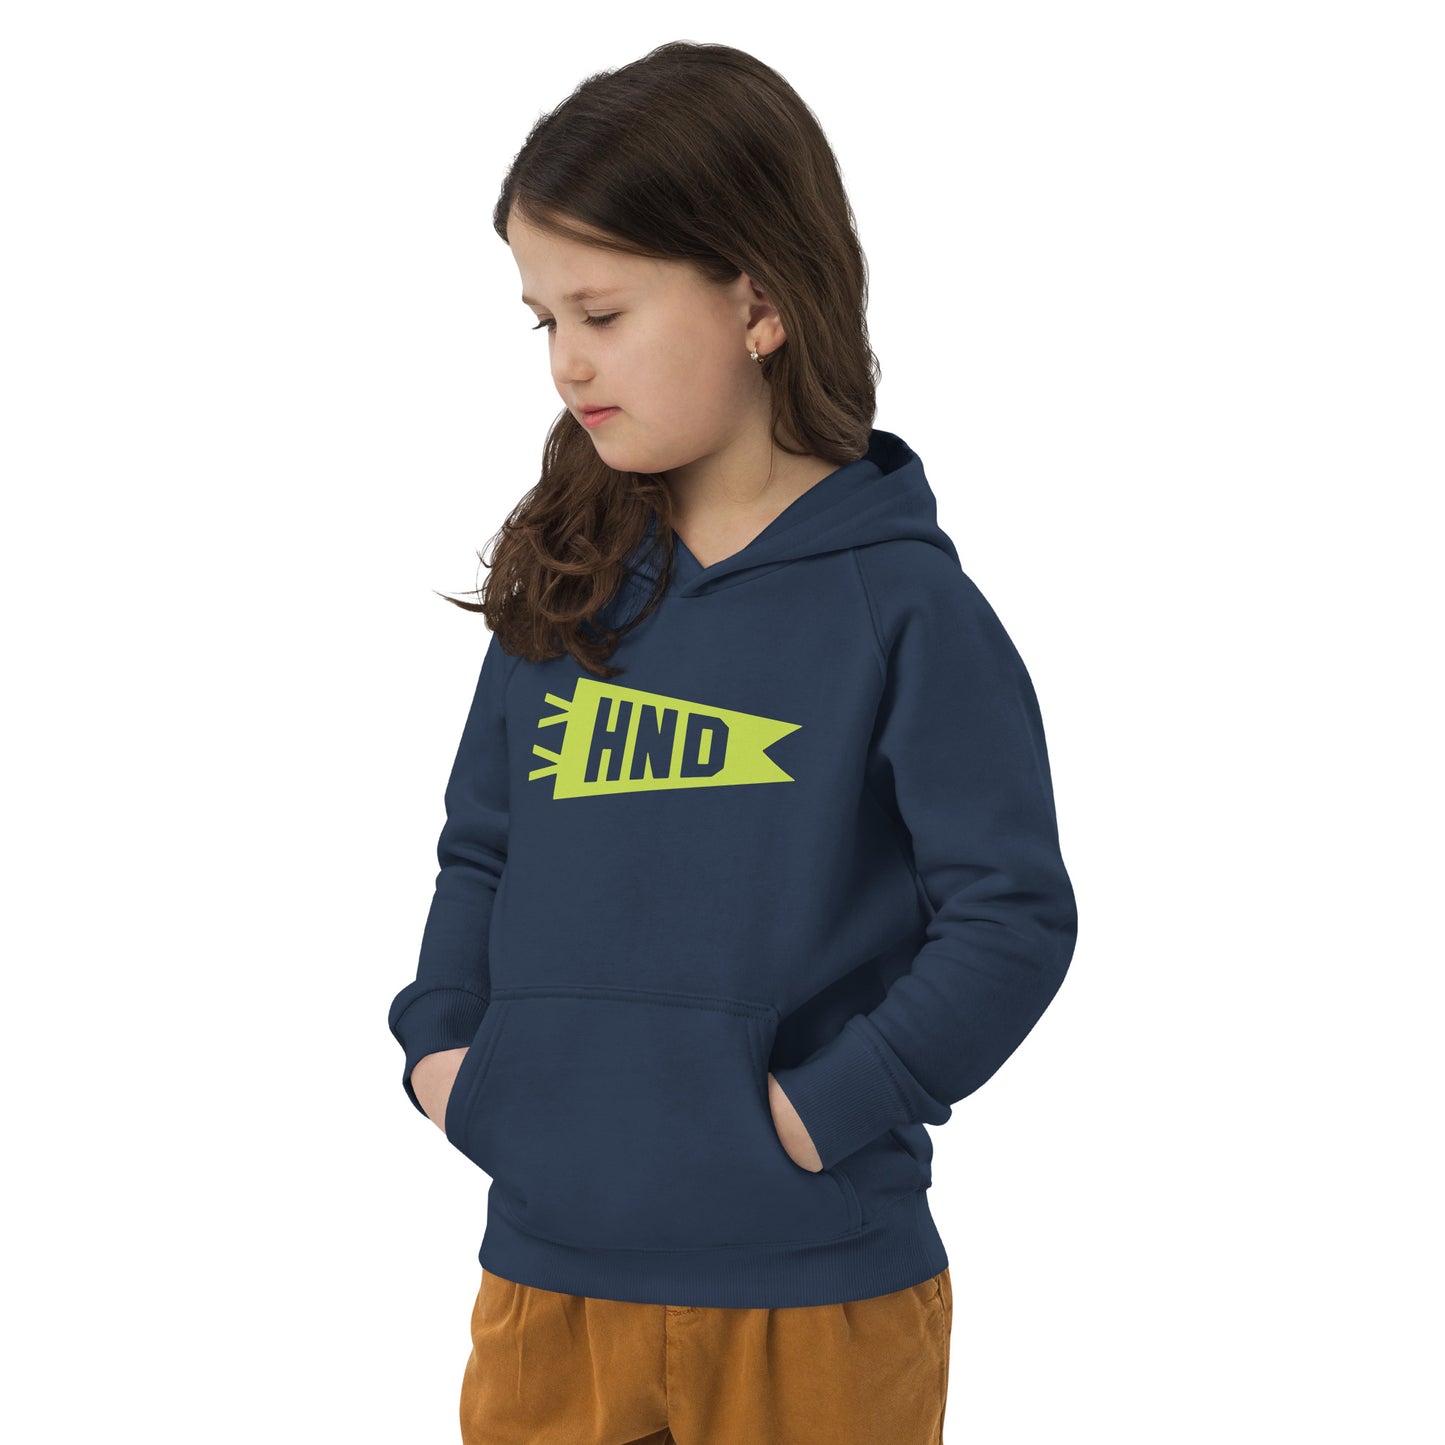 Kid's Sustainable Hoodie - Green Graphic • HND Tokyo • YHM Designs - Image 05